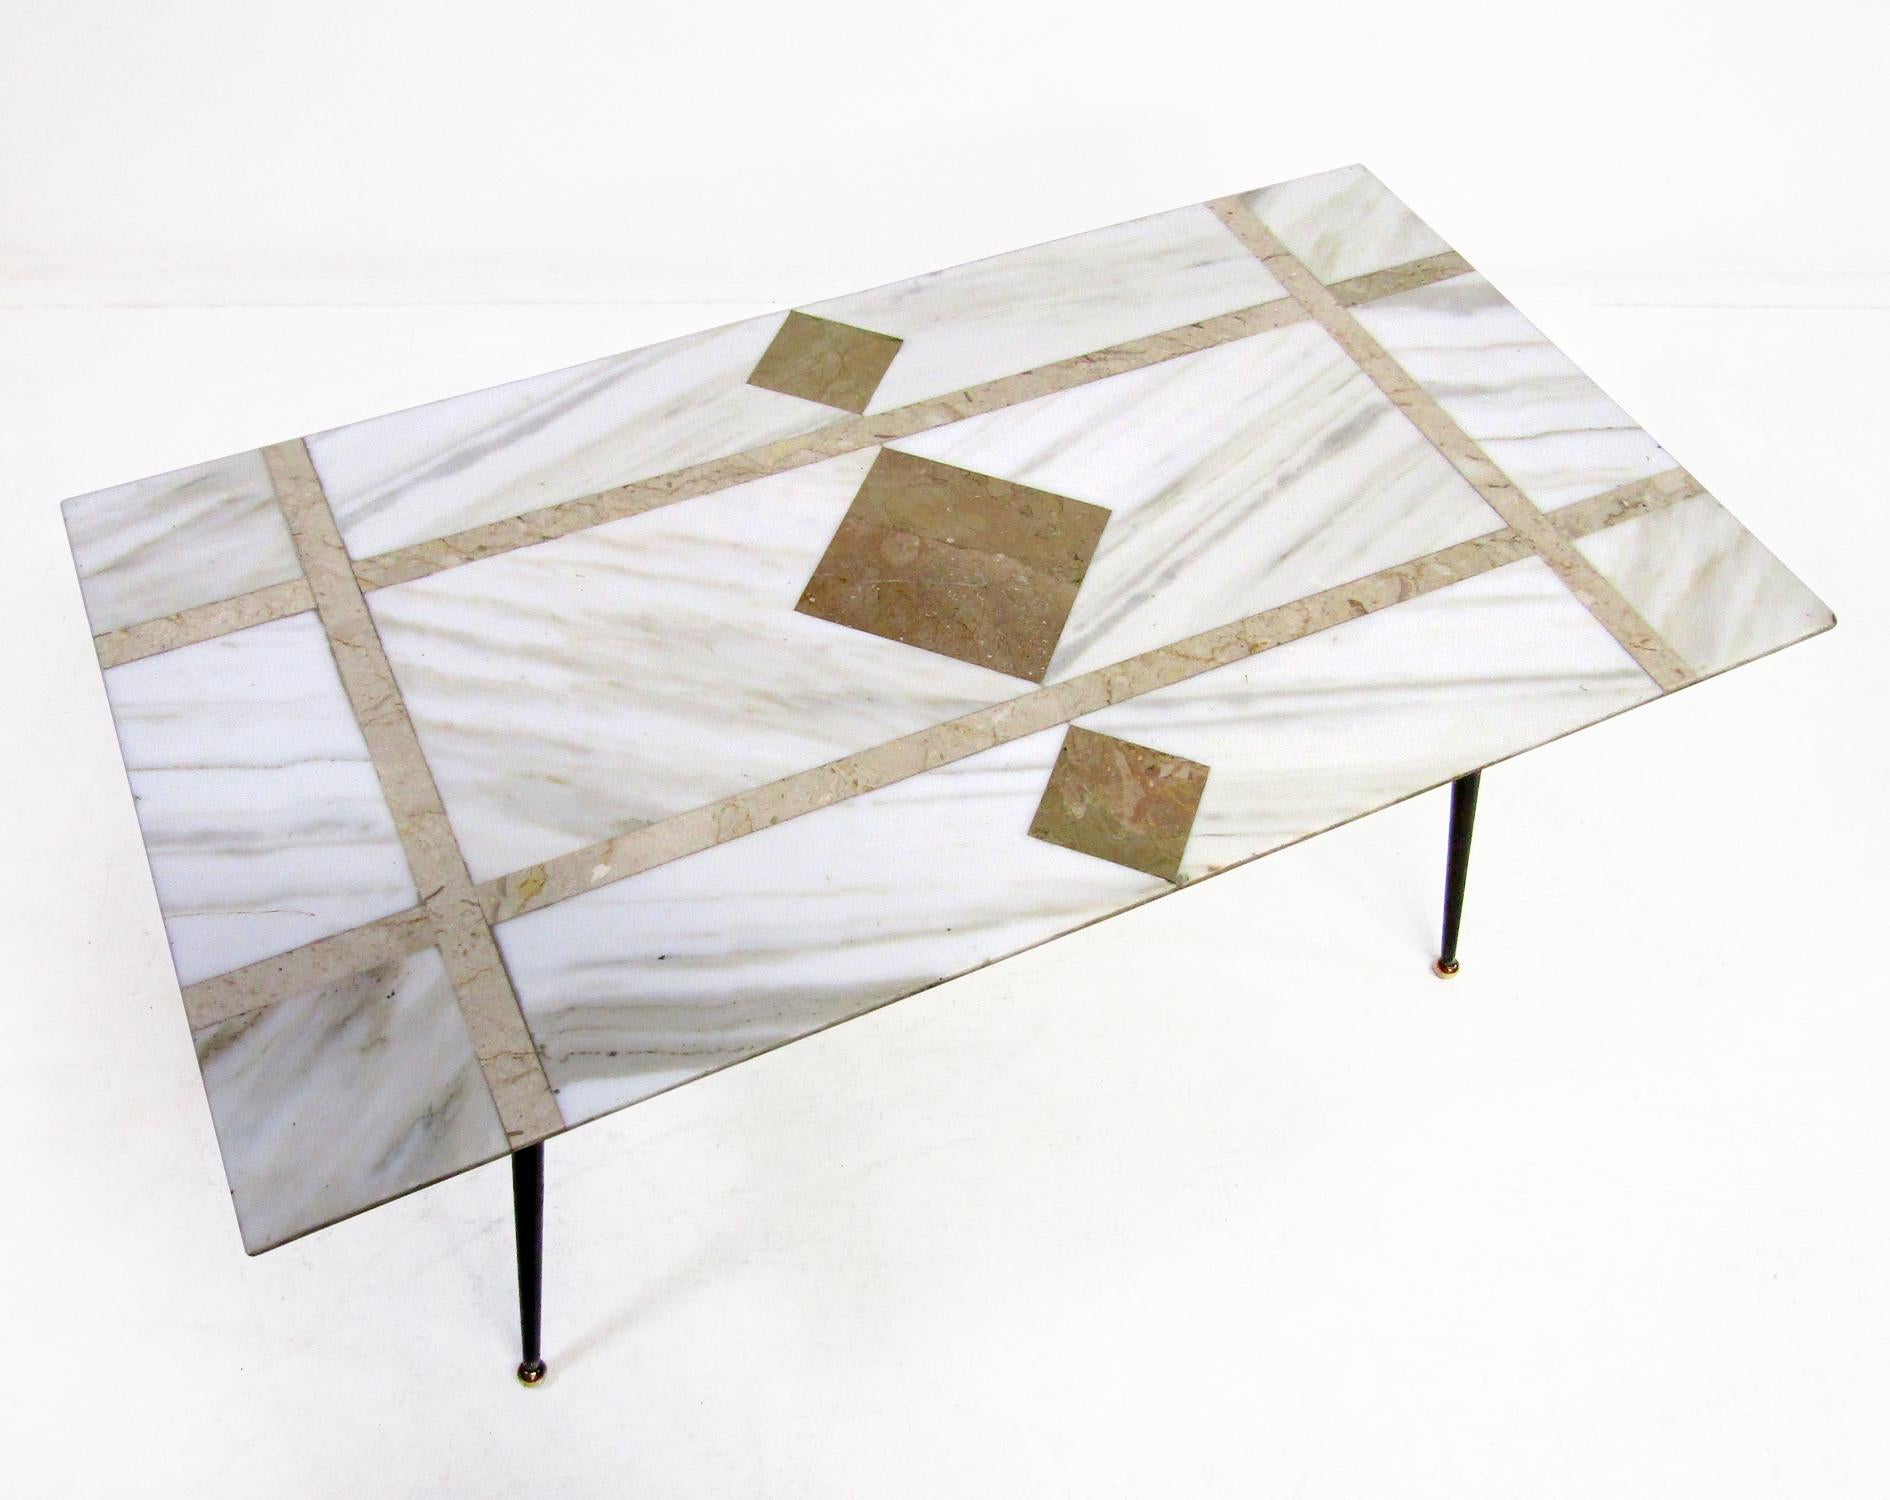 20th Century 1950s Atomic Italian Coffee Table In Pietra Dura Marble with Brass Ball Feet